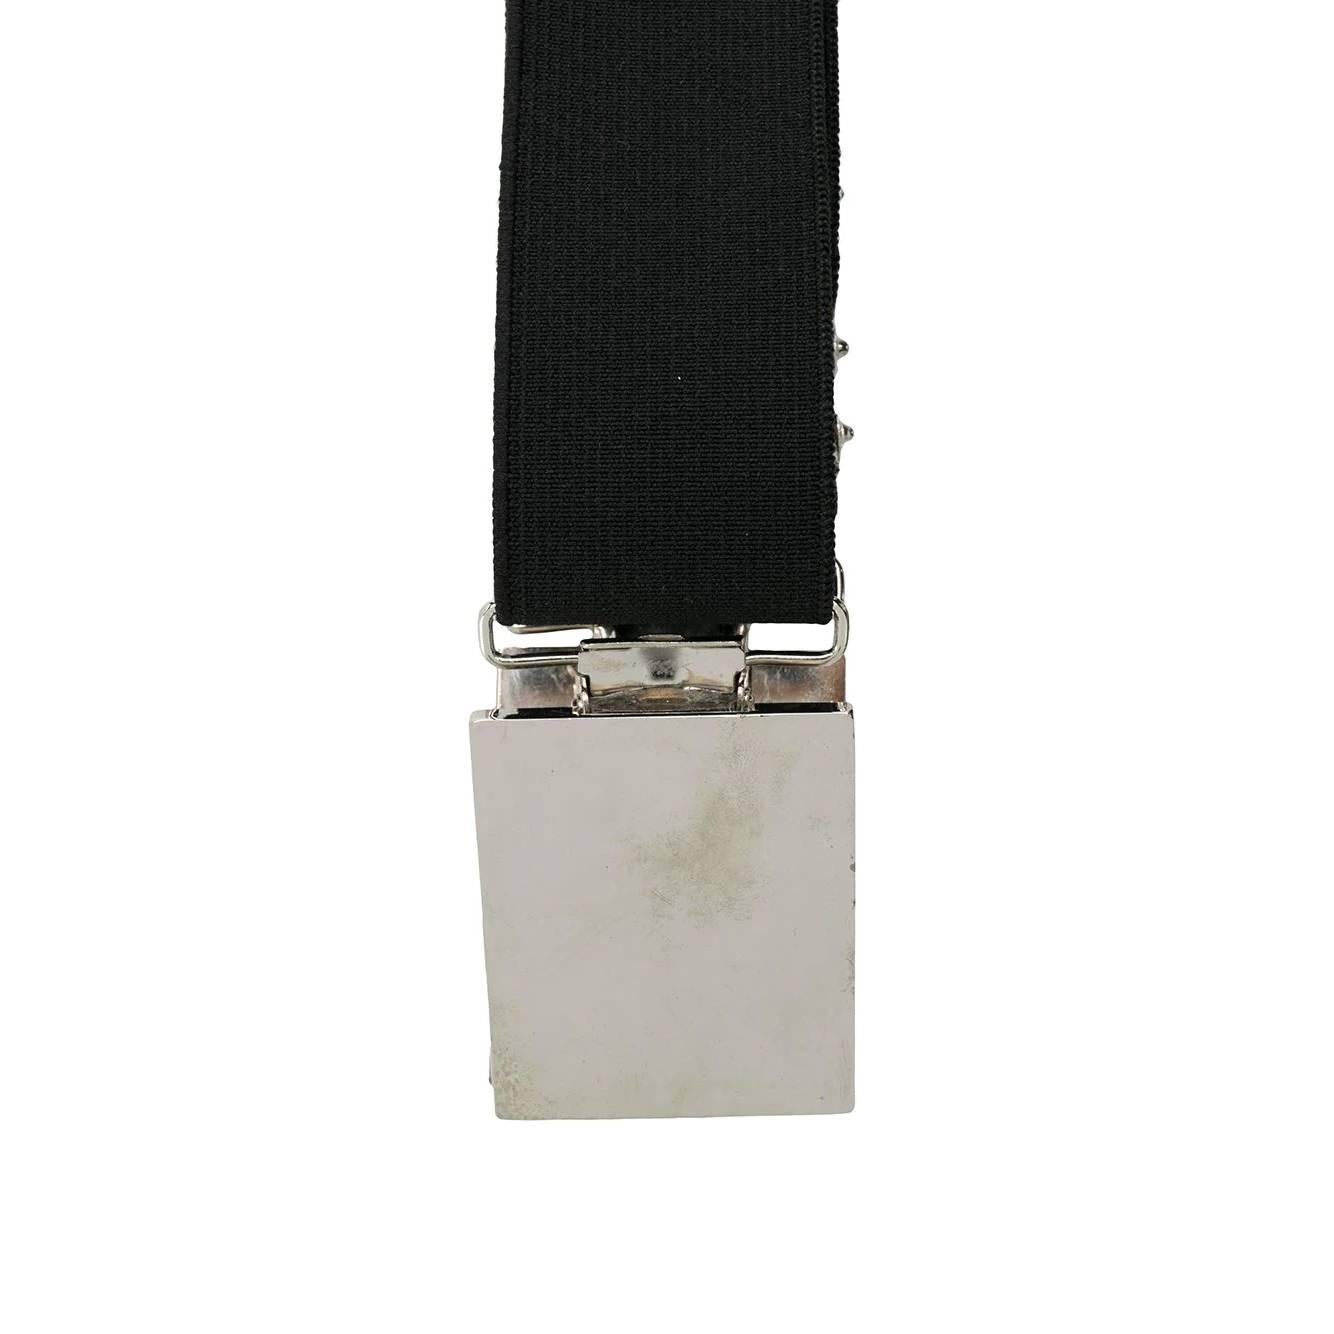 Gianfranco Ferré black stretch fabric braces, model composed by two shoulder straps. Silver metal details.

The product has oxidized and slightly scratched metal parts as shown in the pictures.


Years: 90s

One Size